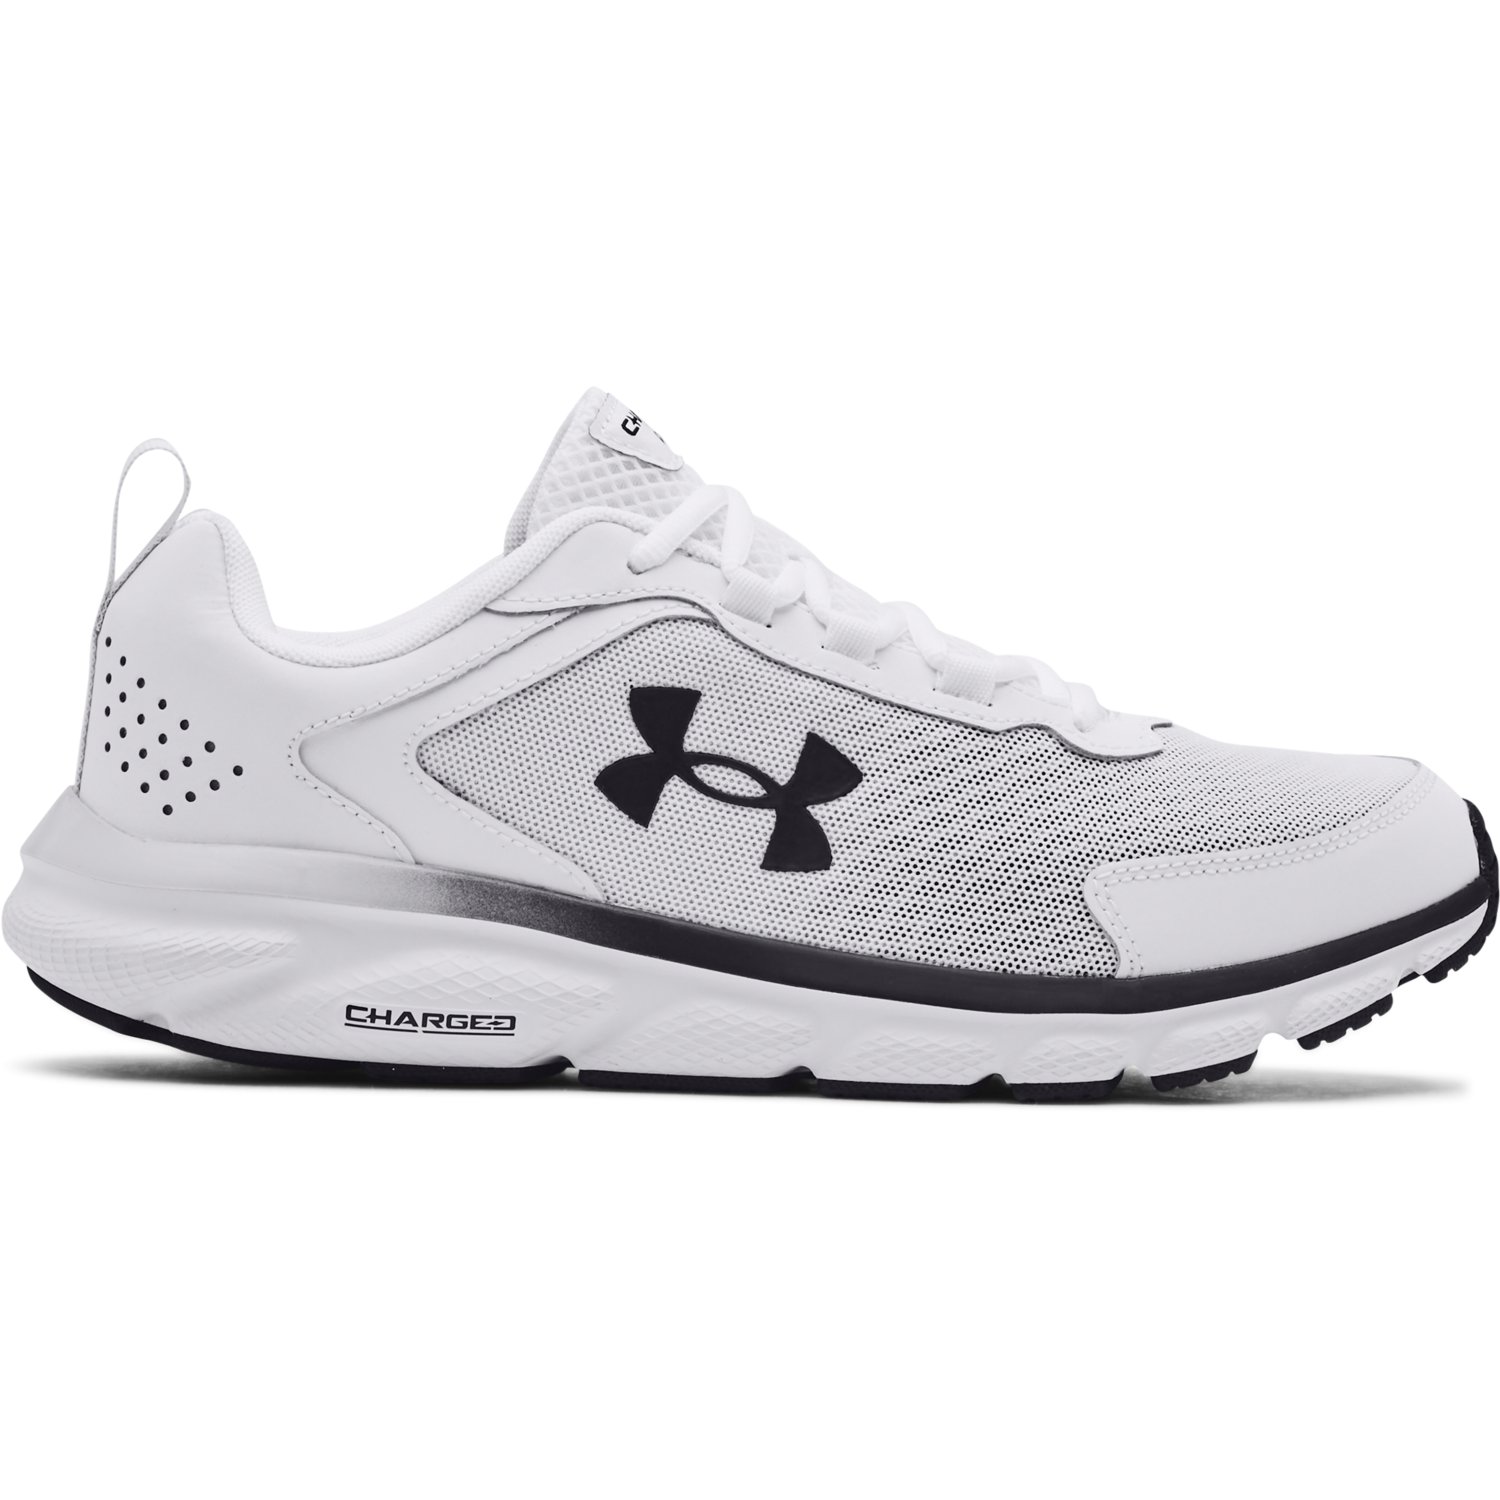 How to Under Armour Shoes Model?